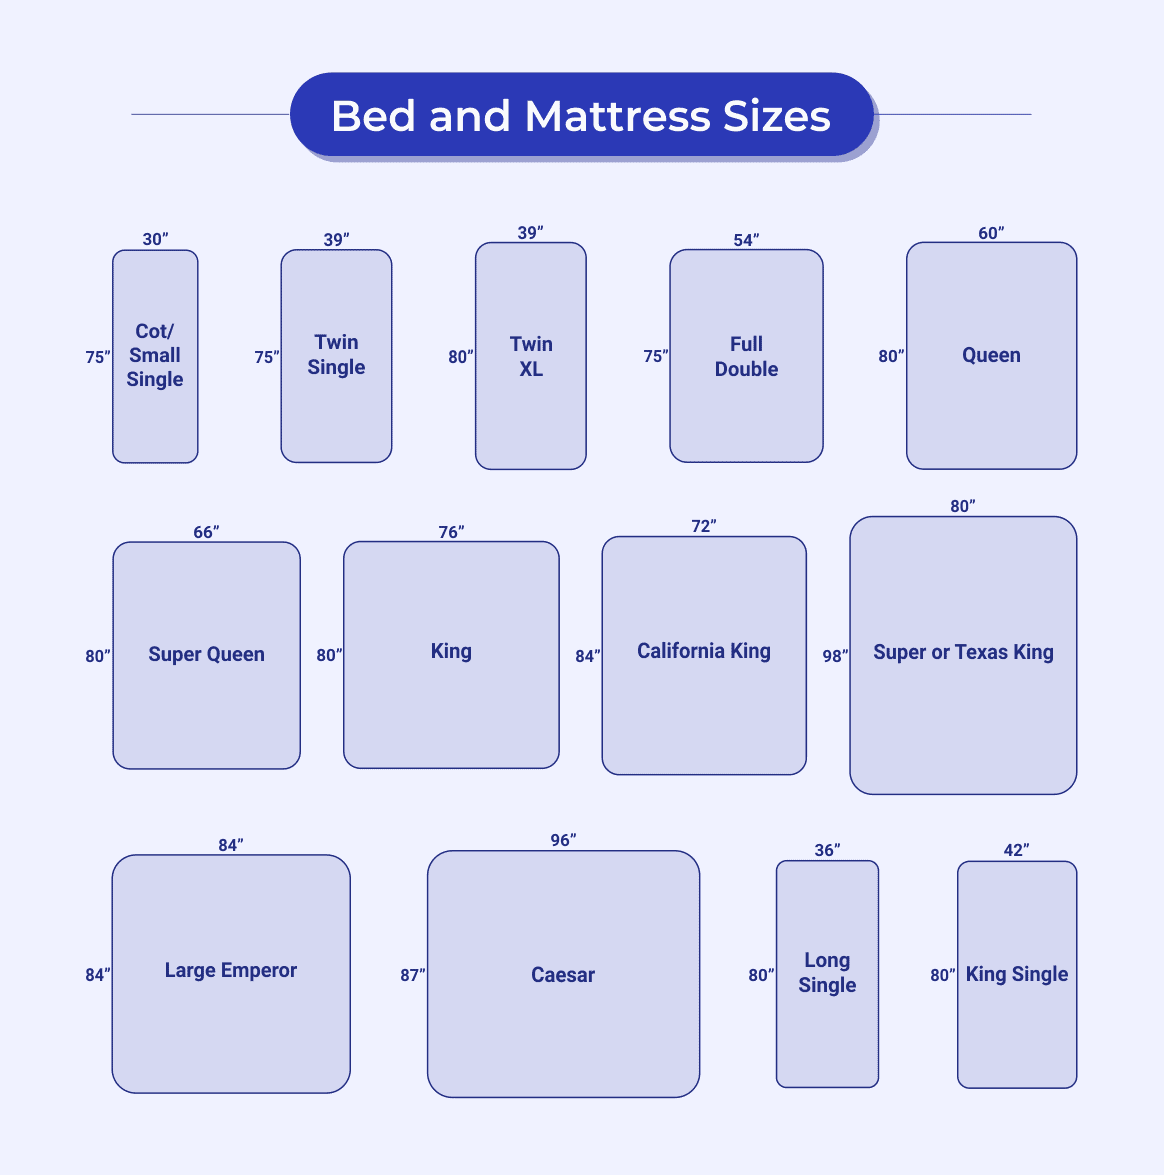 Mattress And Bed Sizes What Are The, What Is The Width Of A King Bed